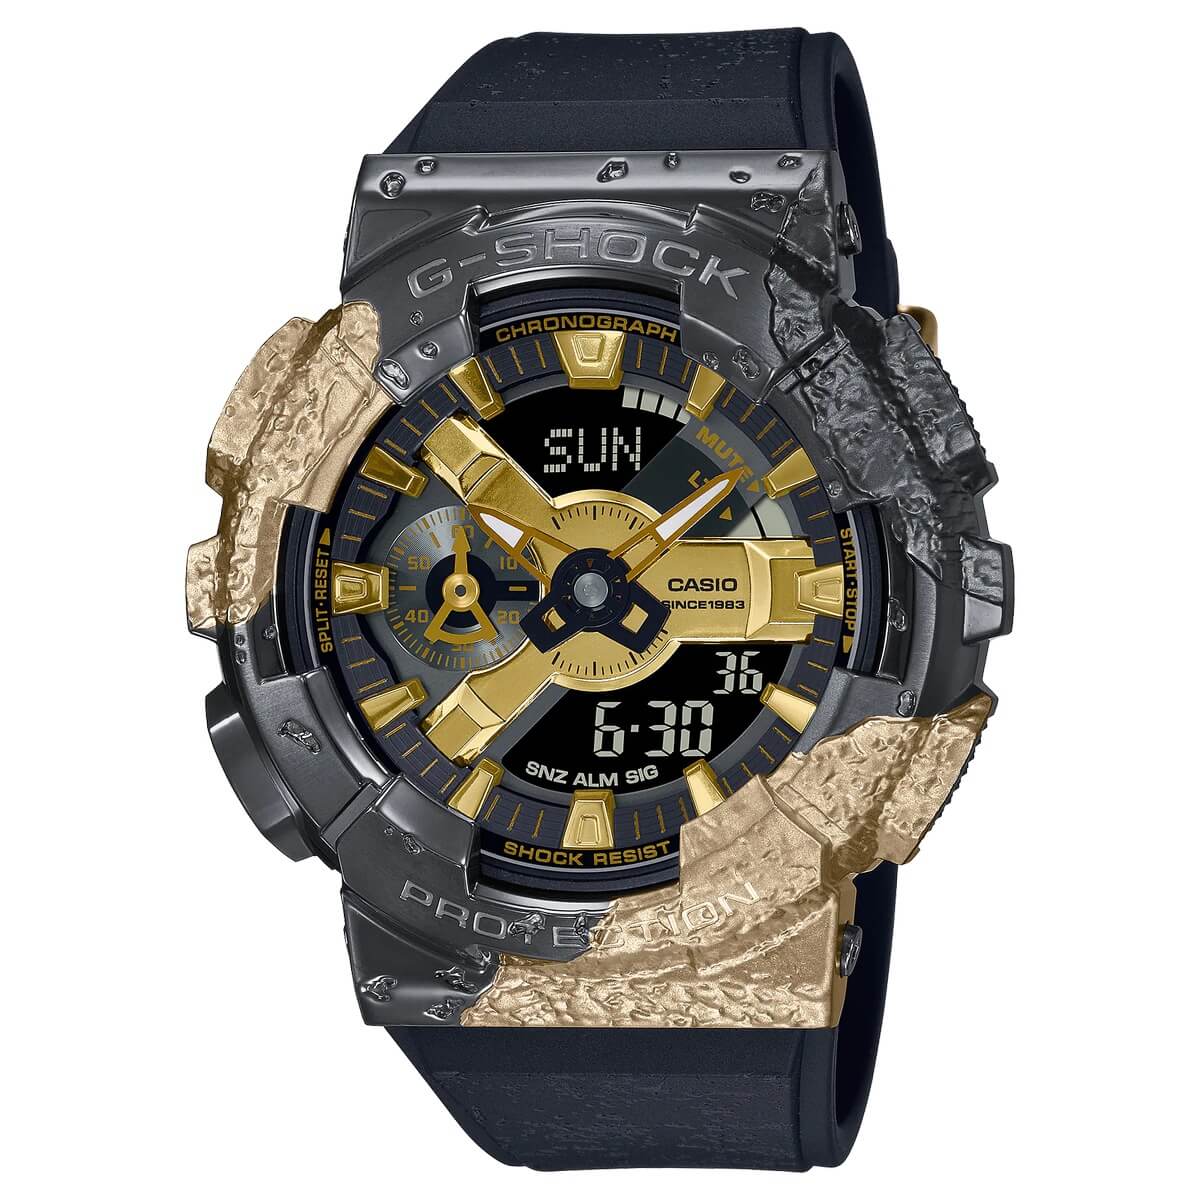 G-Shock Adventurer's Stone Series for 40th Anniversary includes 